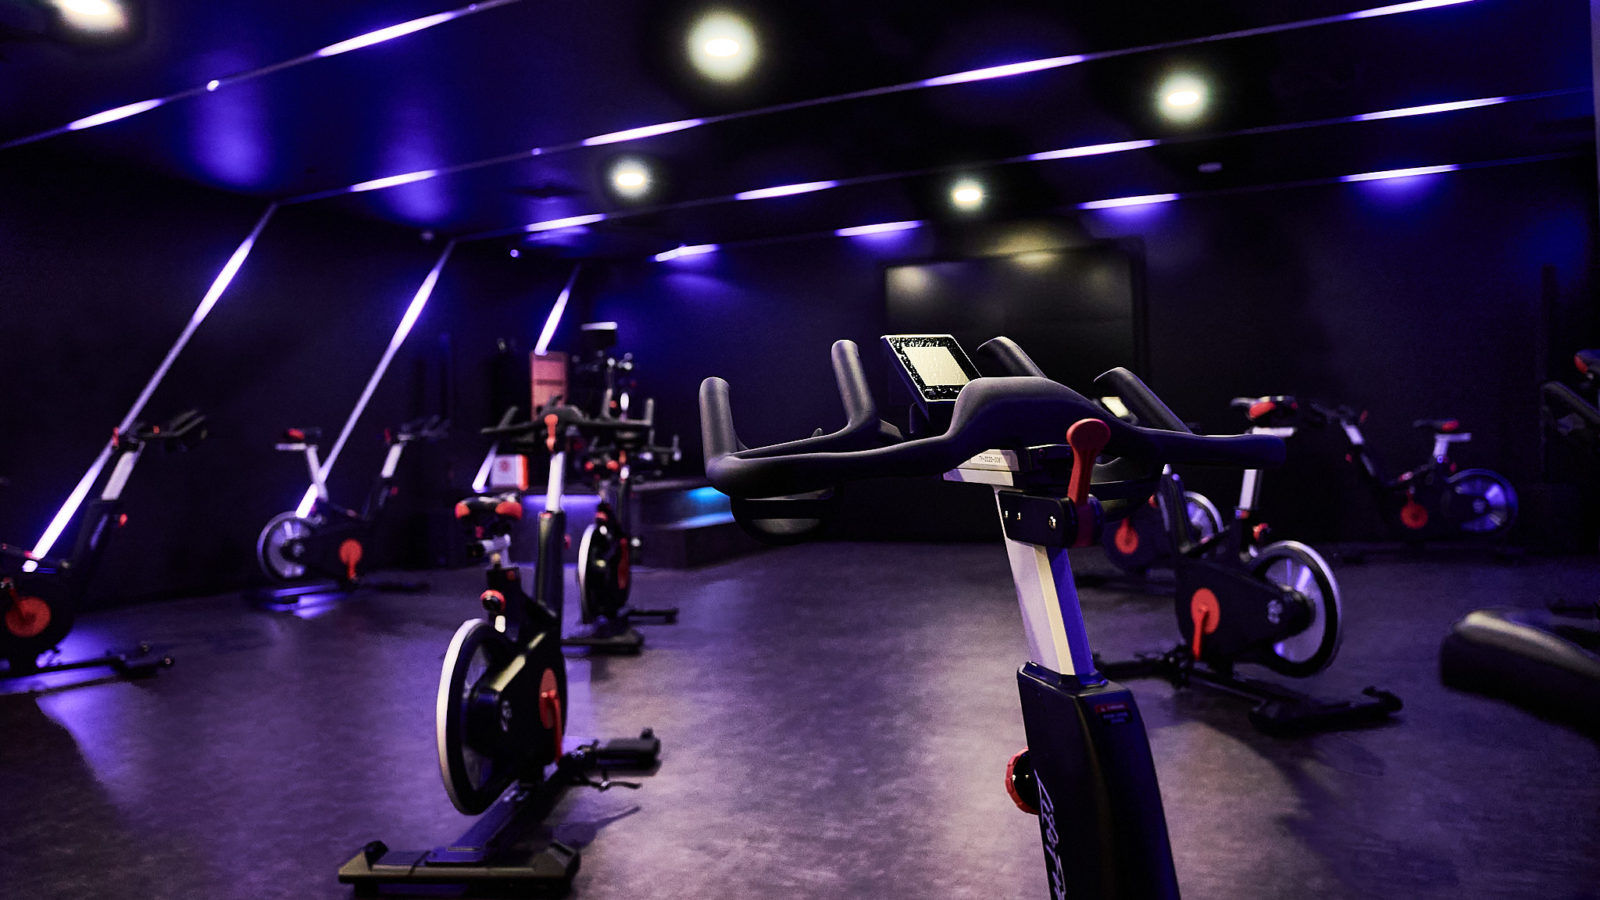 Review: Urban Den is an exclusive Raffles Place gym that welcomes all